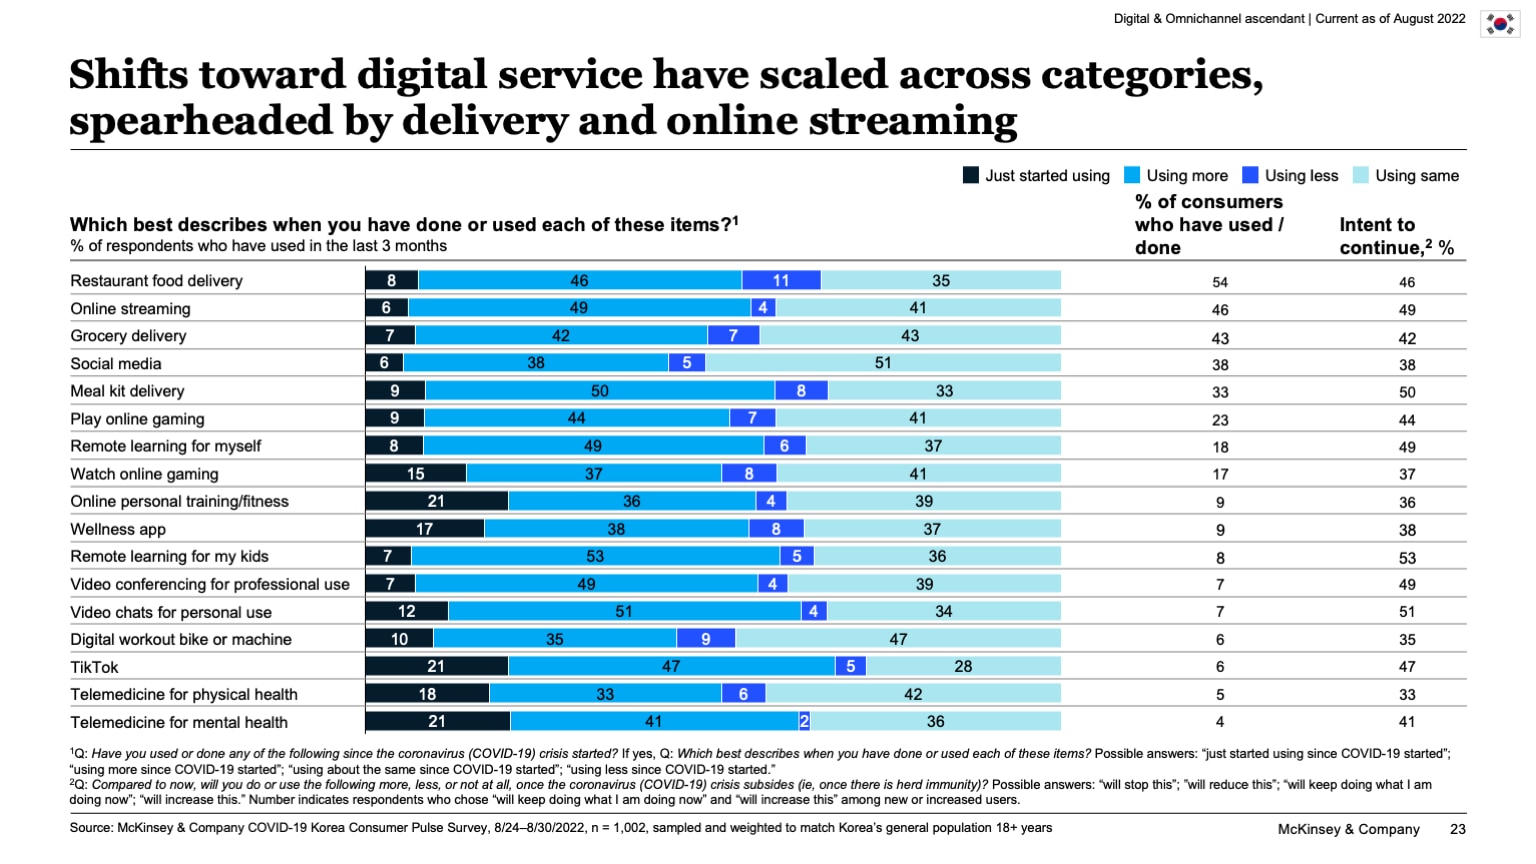 Shifts toward digital service have scaled across categories, spearheaded by delivery and online streaming